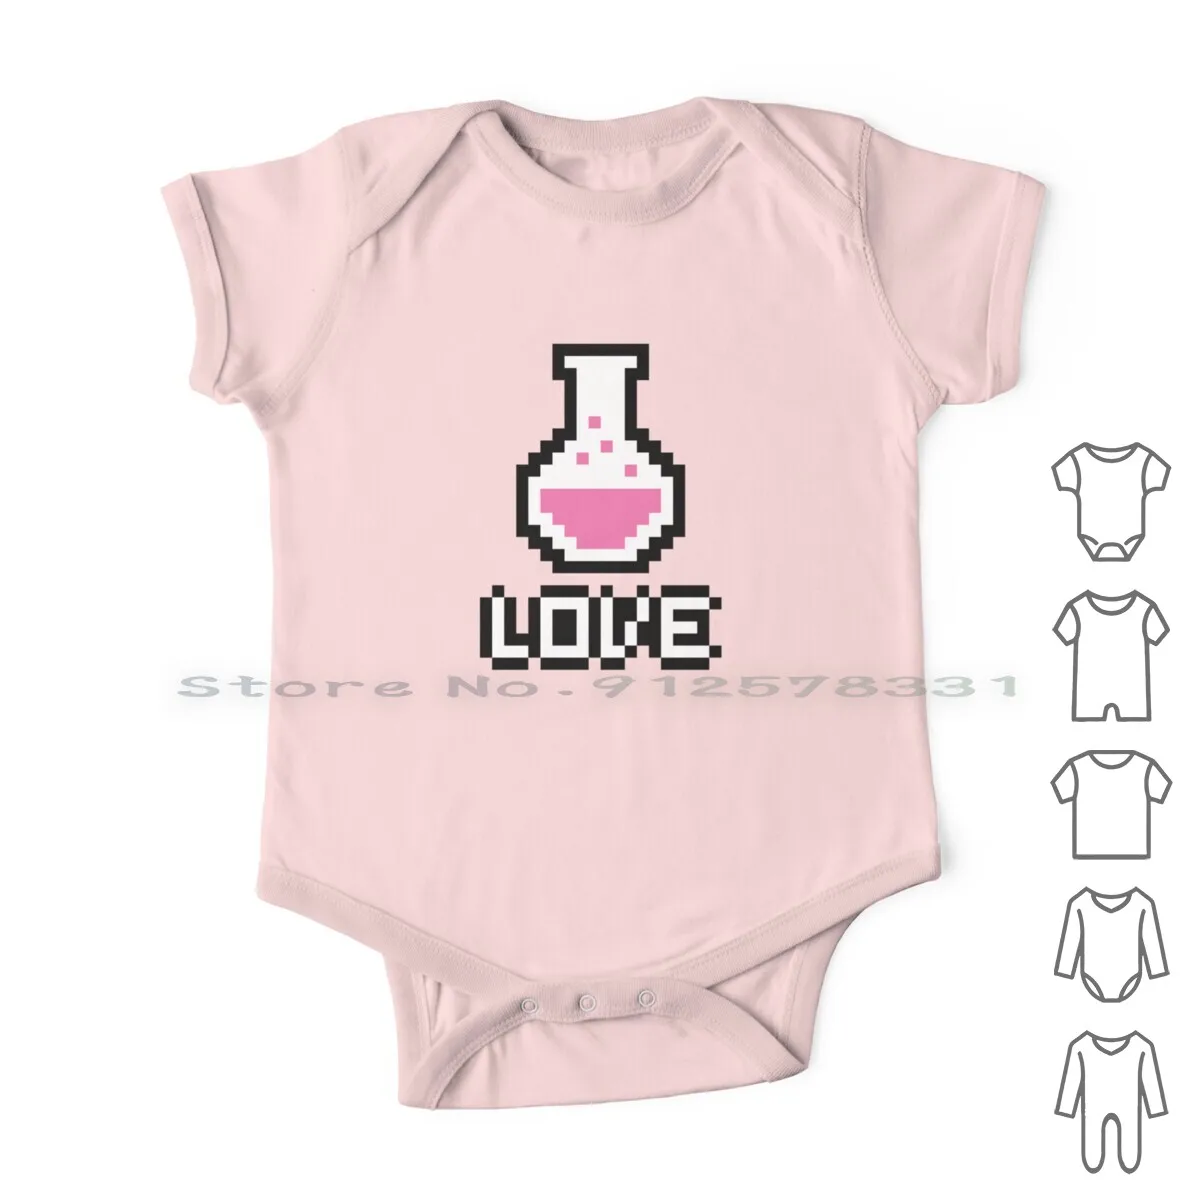 

Potion-Love Newborn Baby Clothes Rompers Cotton Jumpsuits Pixel 8bit 8 Bit Byte Retro Gamer Gaming Emo Hipster Katie White